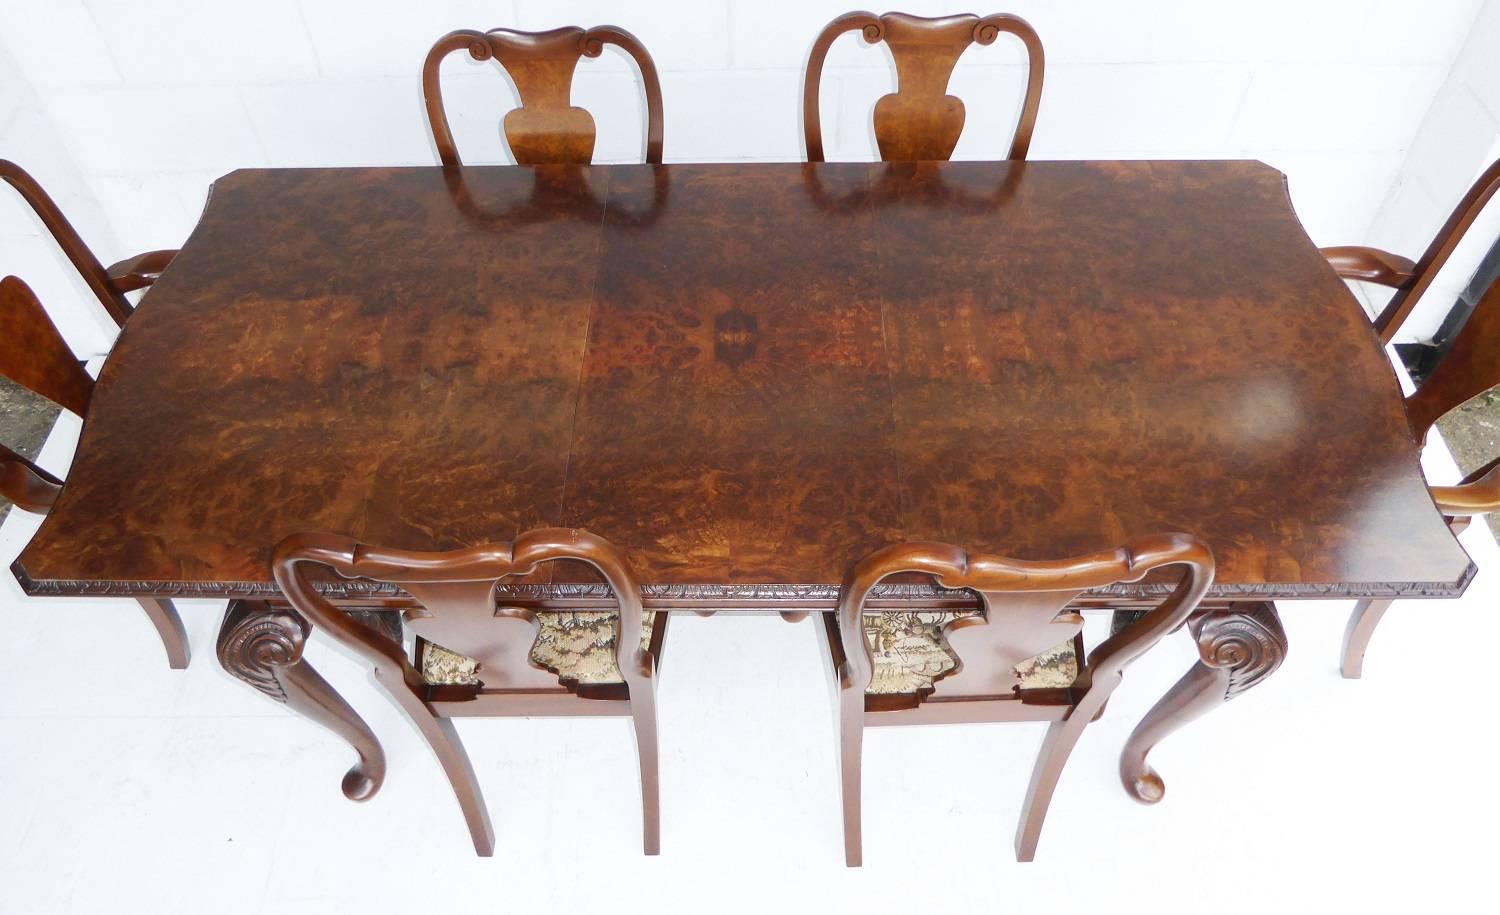 For sale is a burr walnut dining suite comprising burr walnut extending table, six burr walnut dining chairs, including two carvers, as well as a Burr Walnut Sideboard. Each chair has a double arched top with a vase shaped back, standing on cabriol